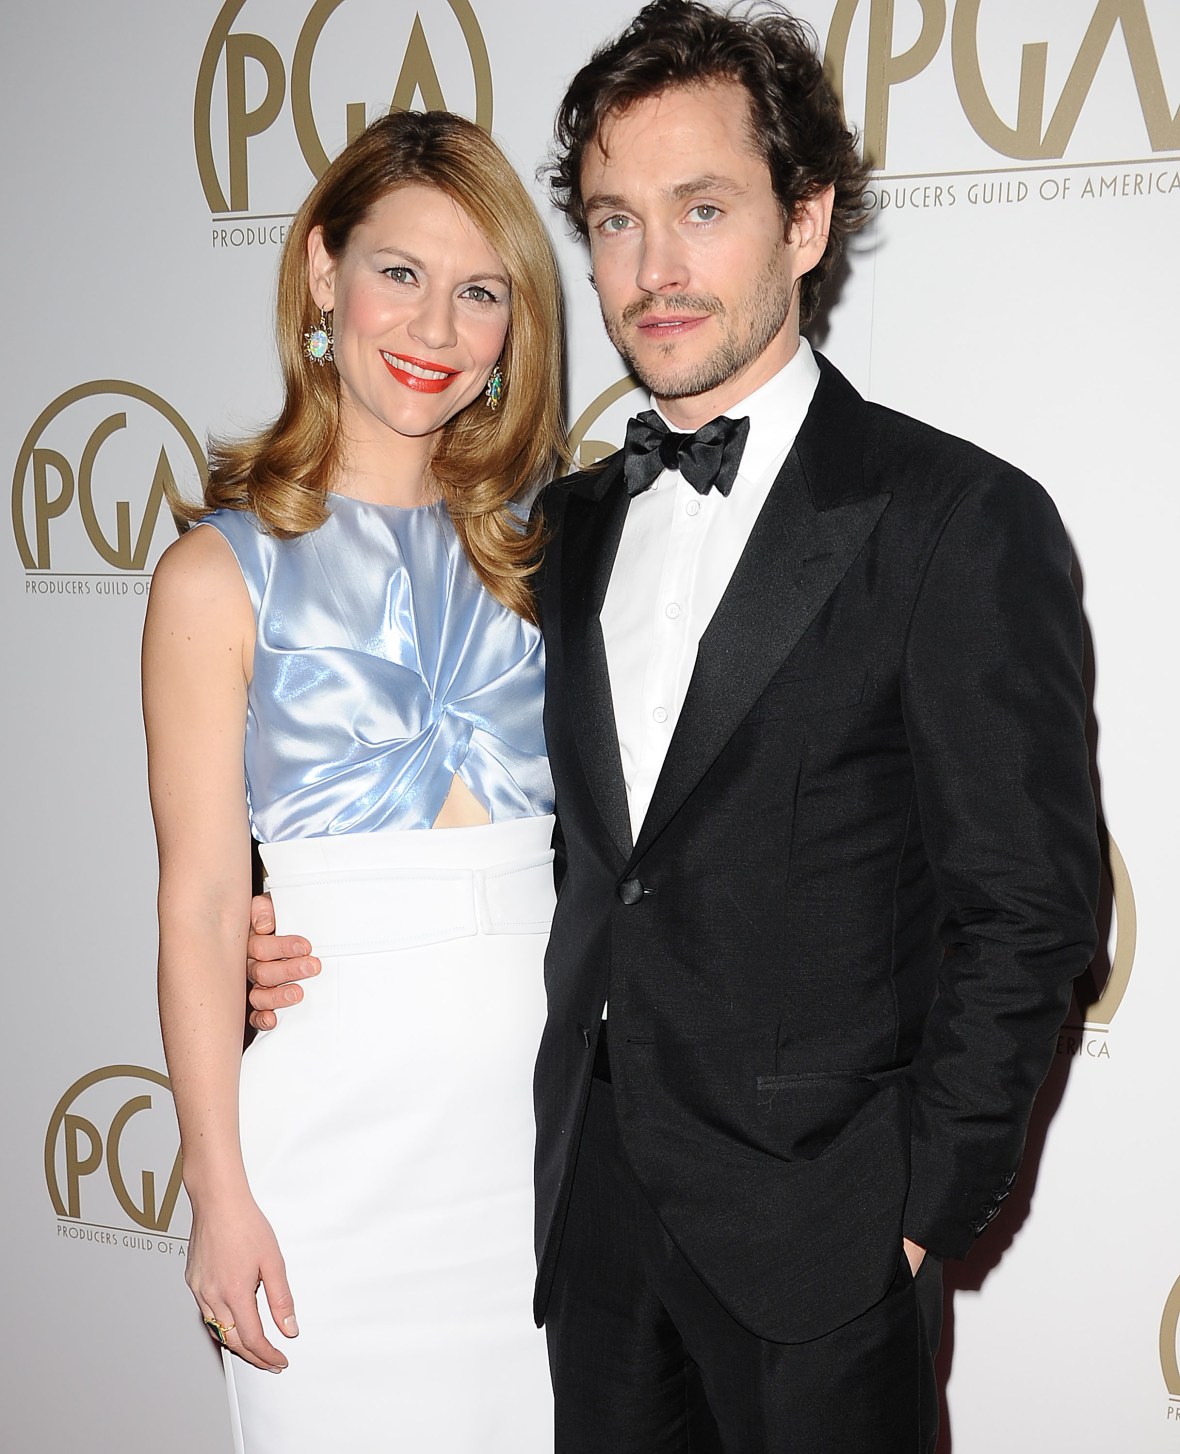 Claire Danes Opens Up About Her Marriage To Hugh Dancy Closer Weekly